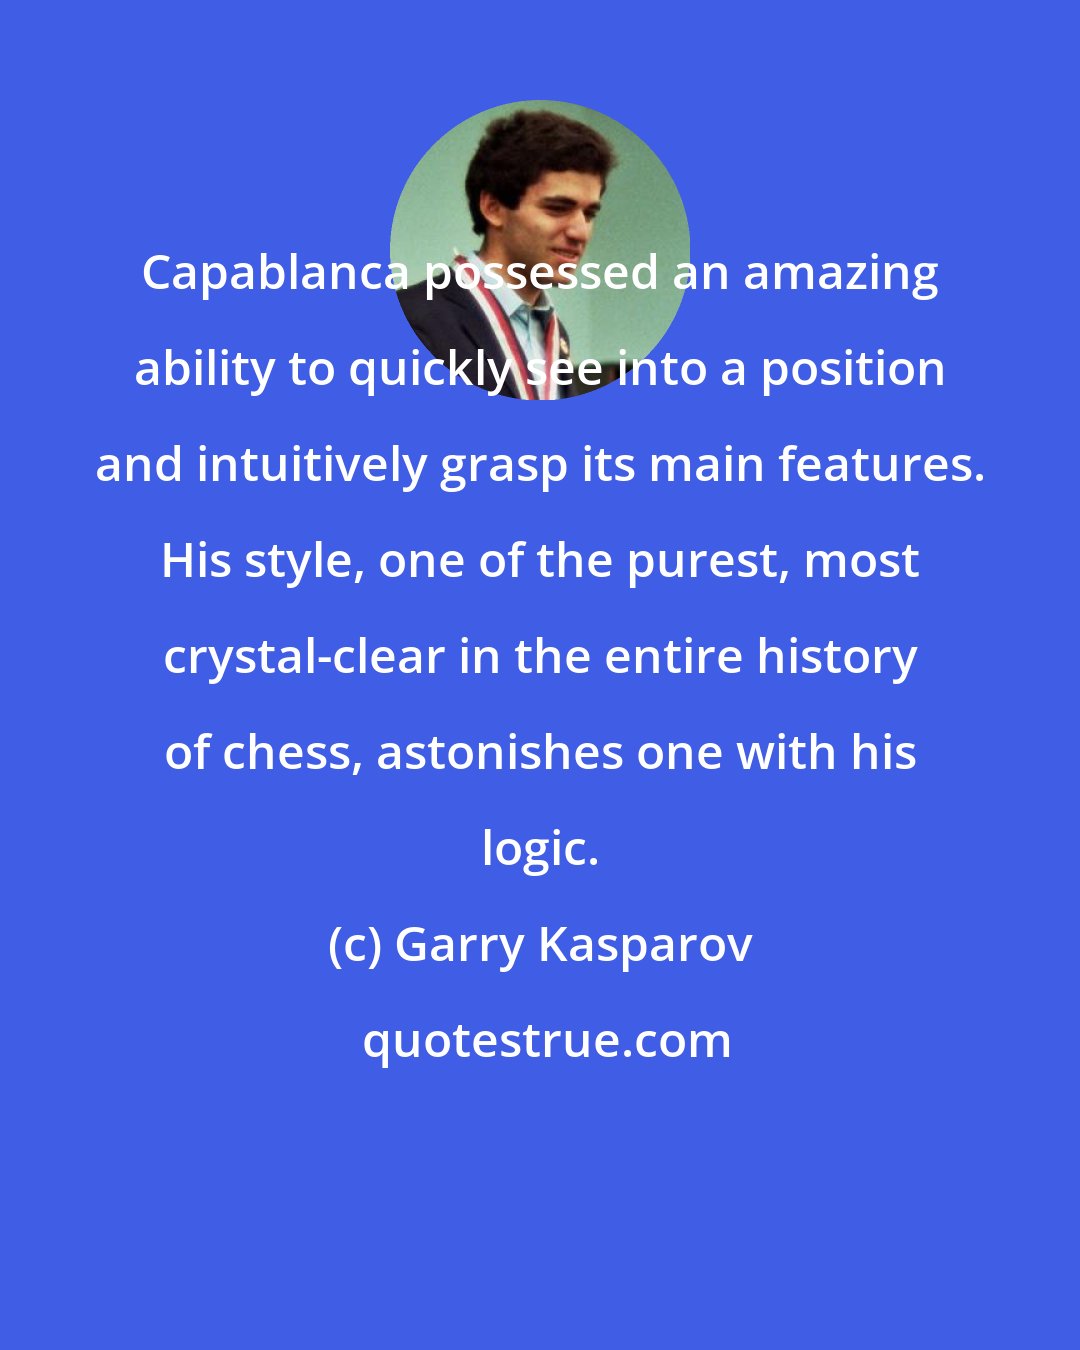 Garry Kasparov: Capablanca possessed an amazing ability to quickly see into a position and intuitively grasp its main features. His style, one of the purest, most crystal-clear in the entire history of chess, astonishes one with his logic.